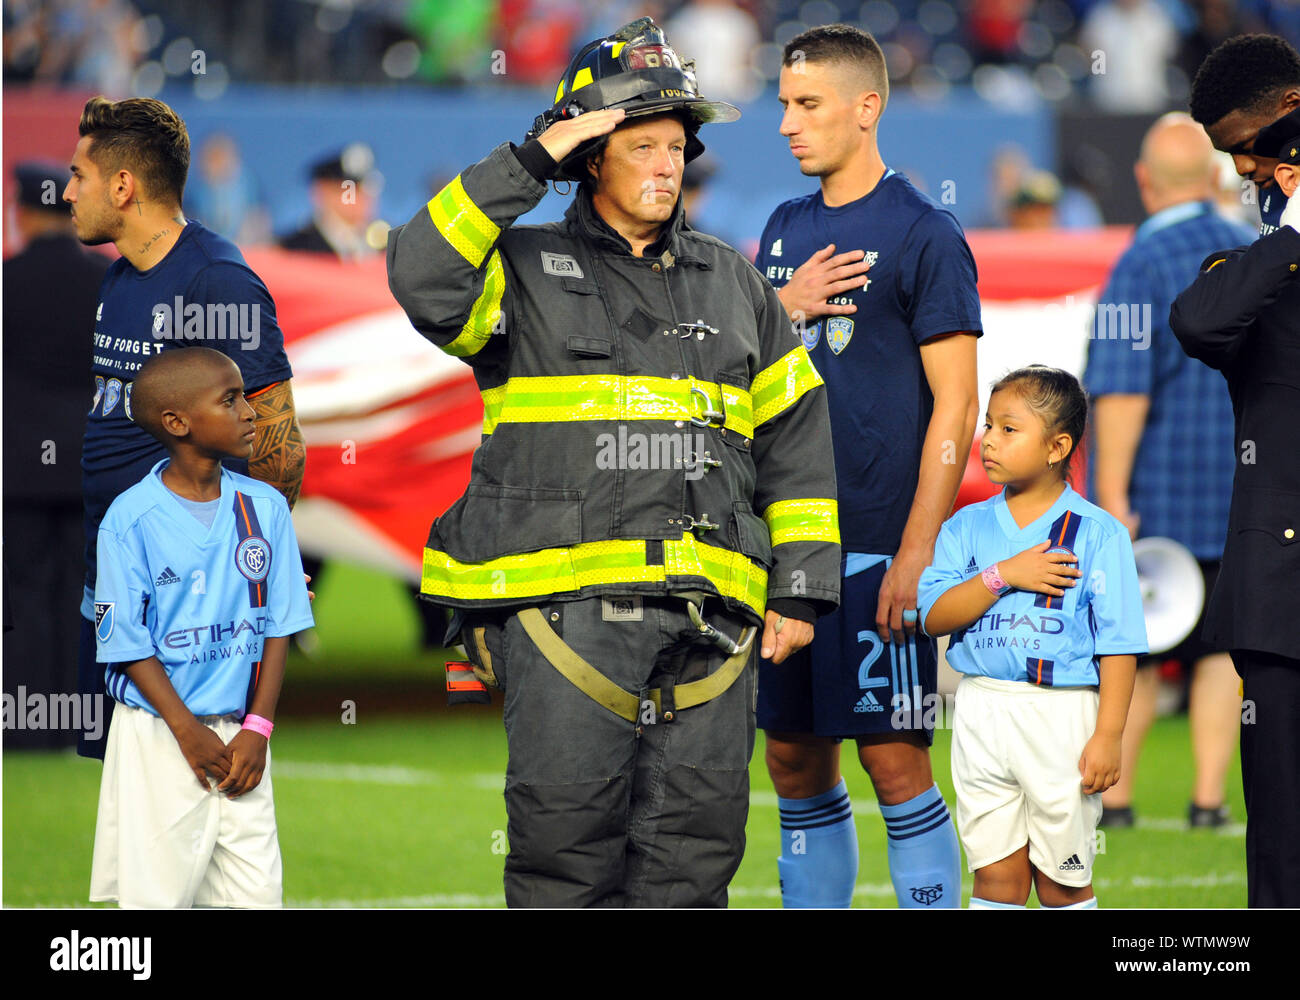 New York, NY, USA. 11th Sep, 2019. First Responders salute the flag before the NYCFC soccer game against Toronto FC at Yankee Stadium in New York, NY. Bennett Cohen/CSM/Alamy Live News Stock Photo